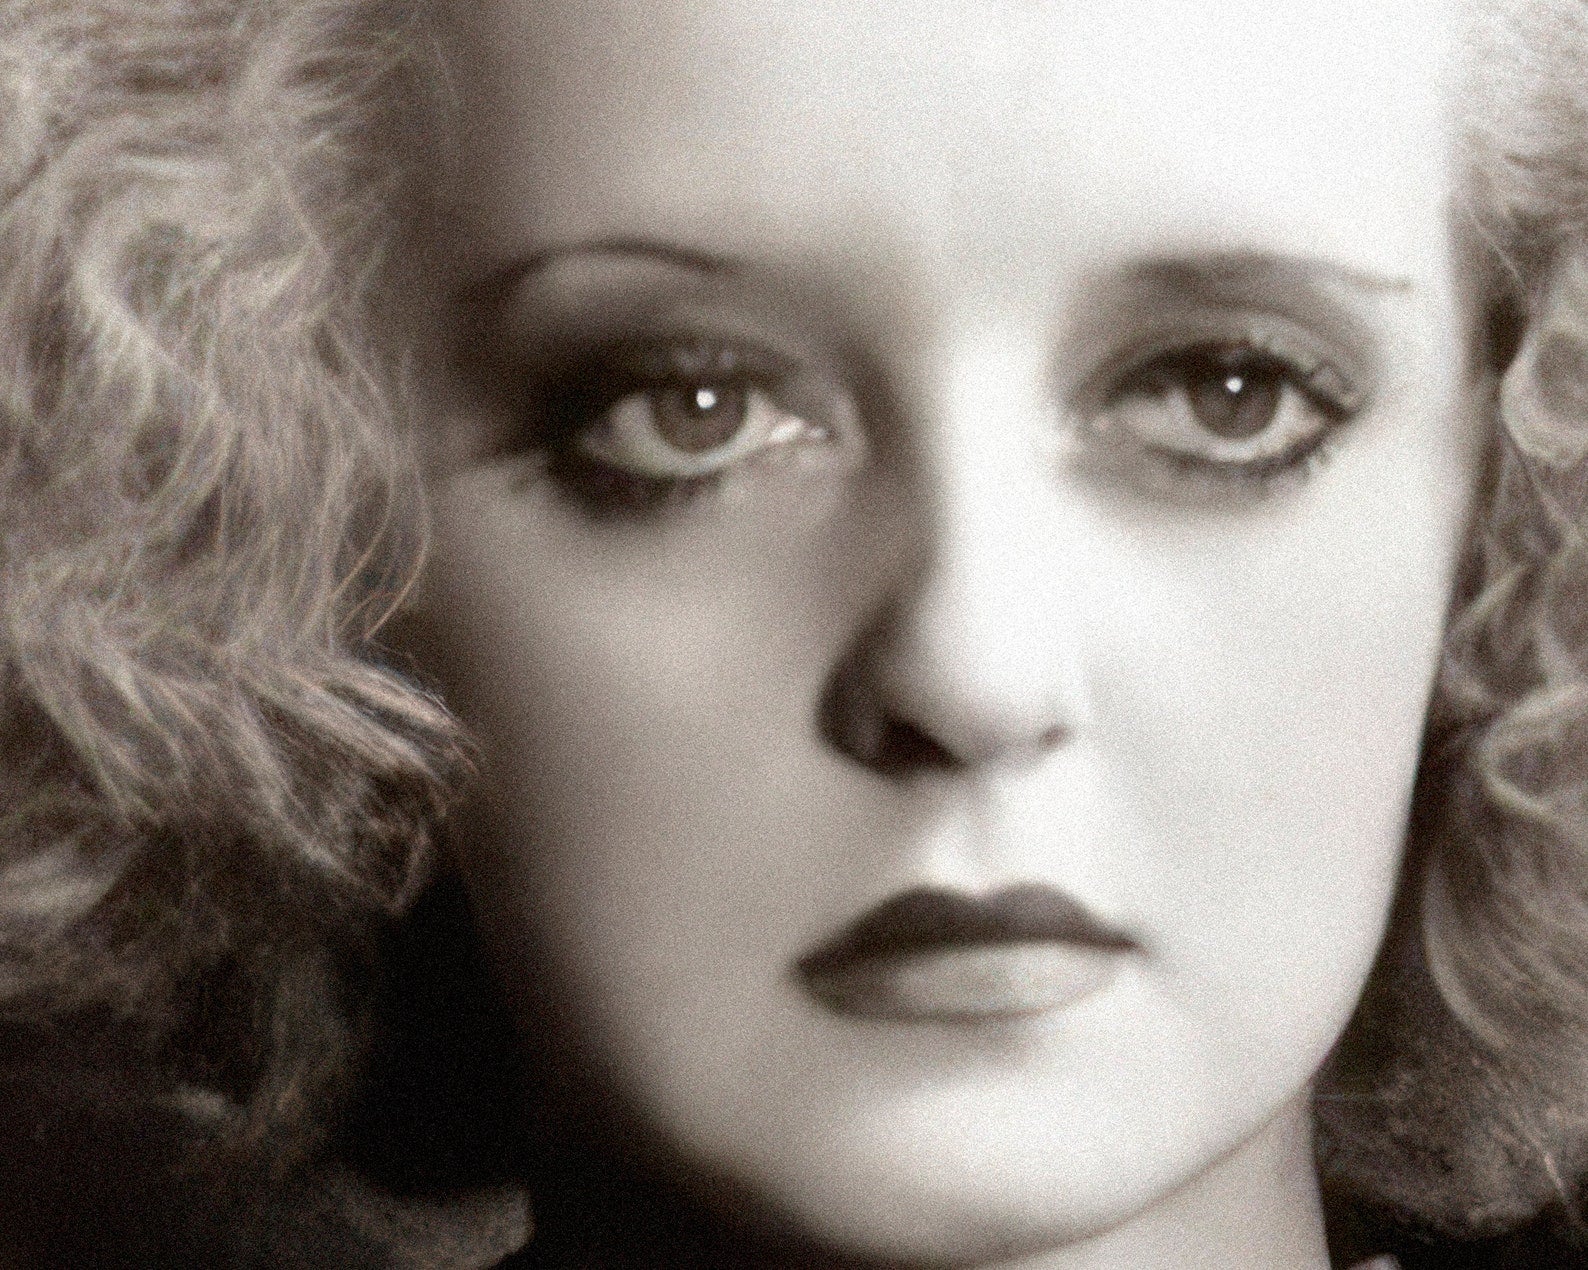 Vintage Photograph "Bette Davis" Promotional Still from the movie "Of Human Bondage" (c.1934) - Mabon Gallery